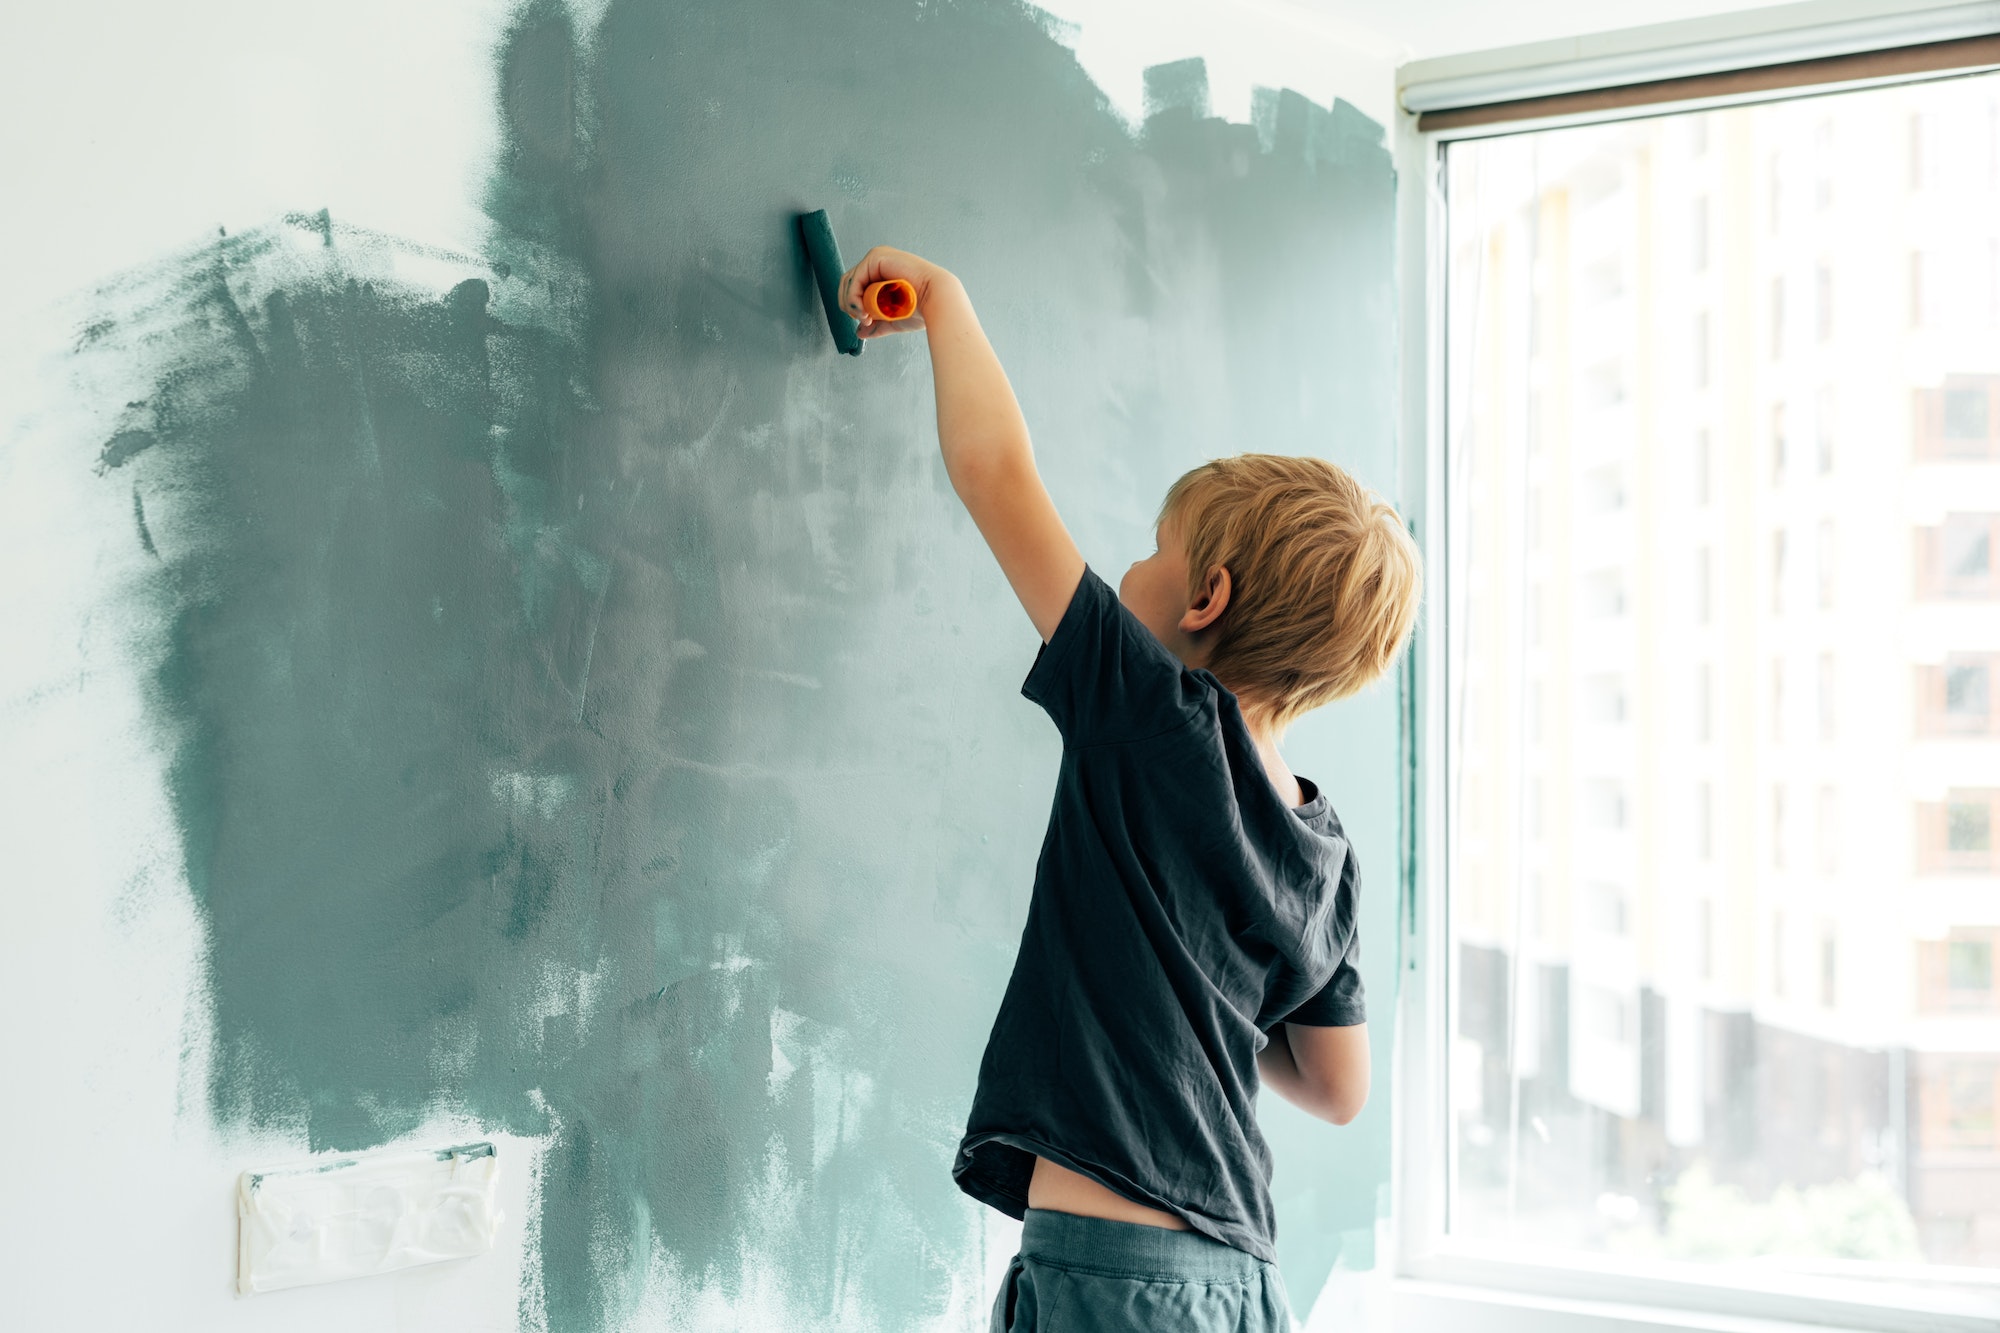 Home improvement. the boy paints the wall in the room with a roller